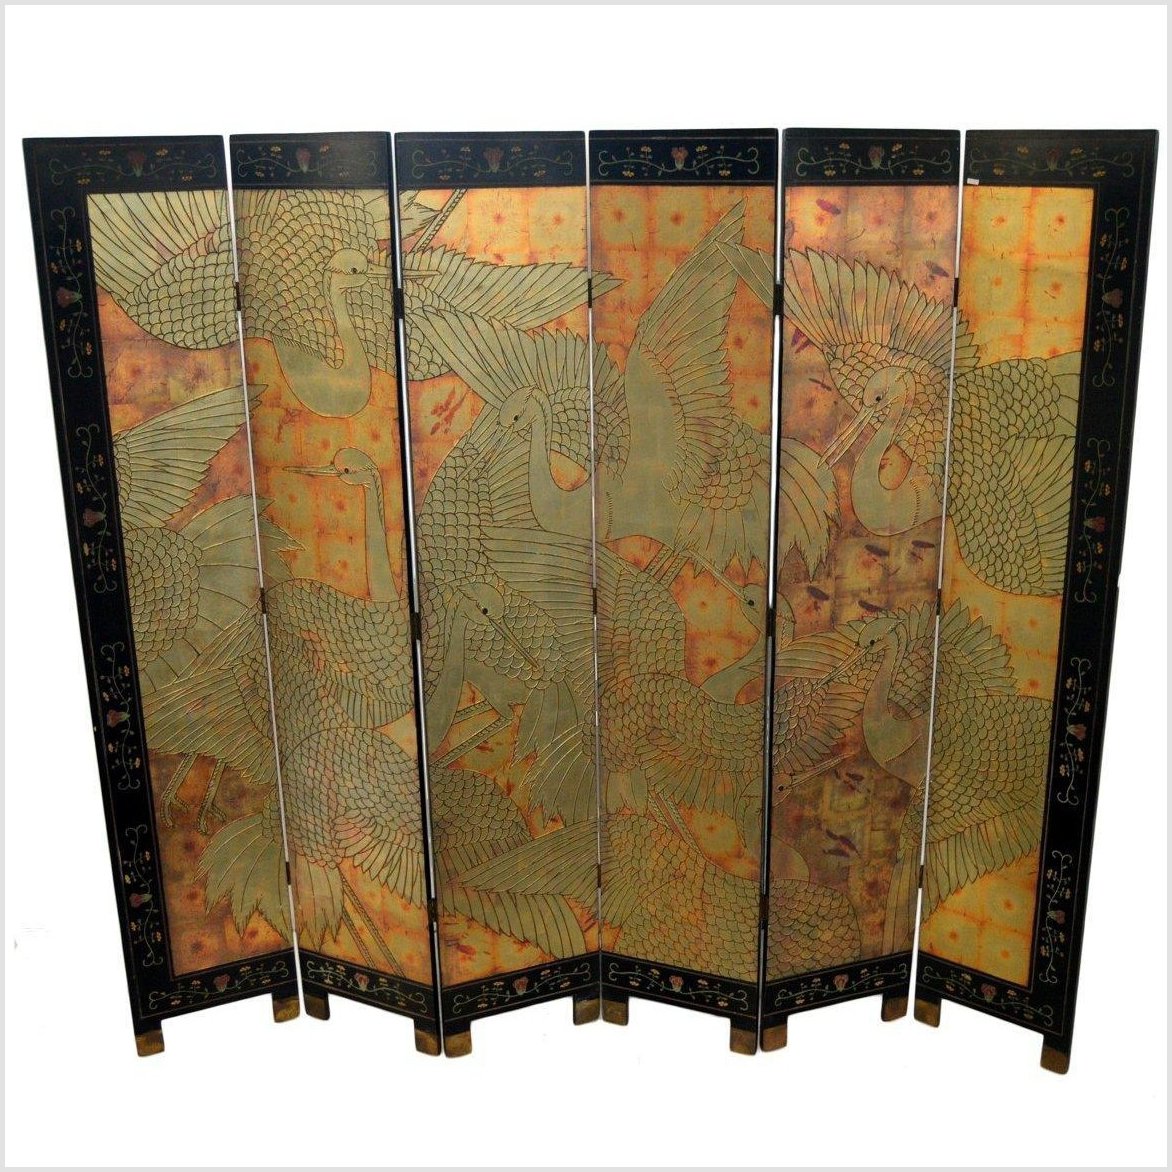 6-Panel Screen Depicting Cranes in Gold, Jade and Black Tones- Asian Antiques, Vintage Home Decor & Chinese Furniture - FEA Home